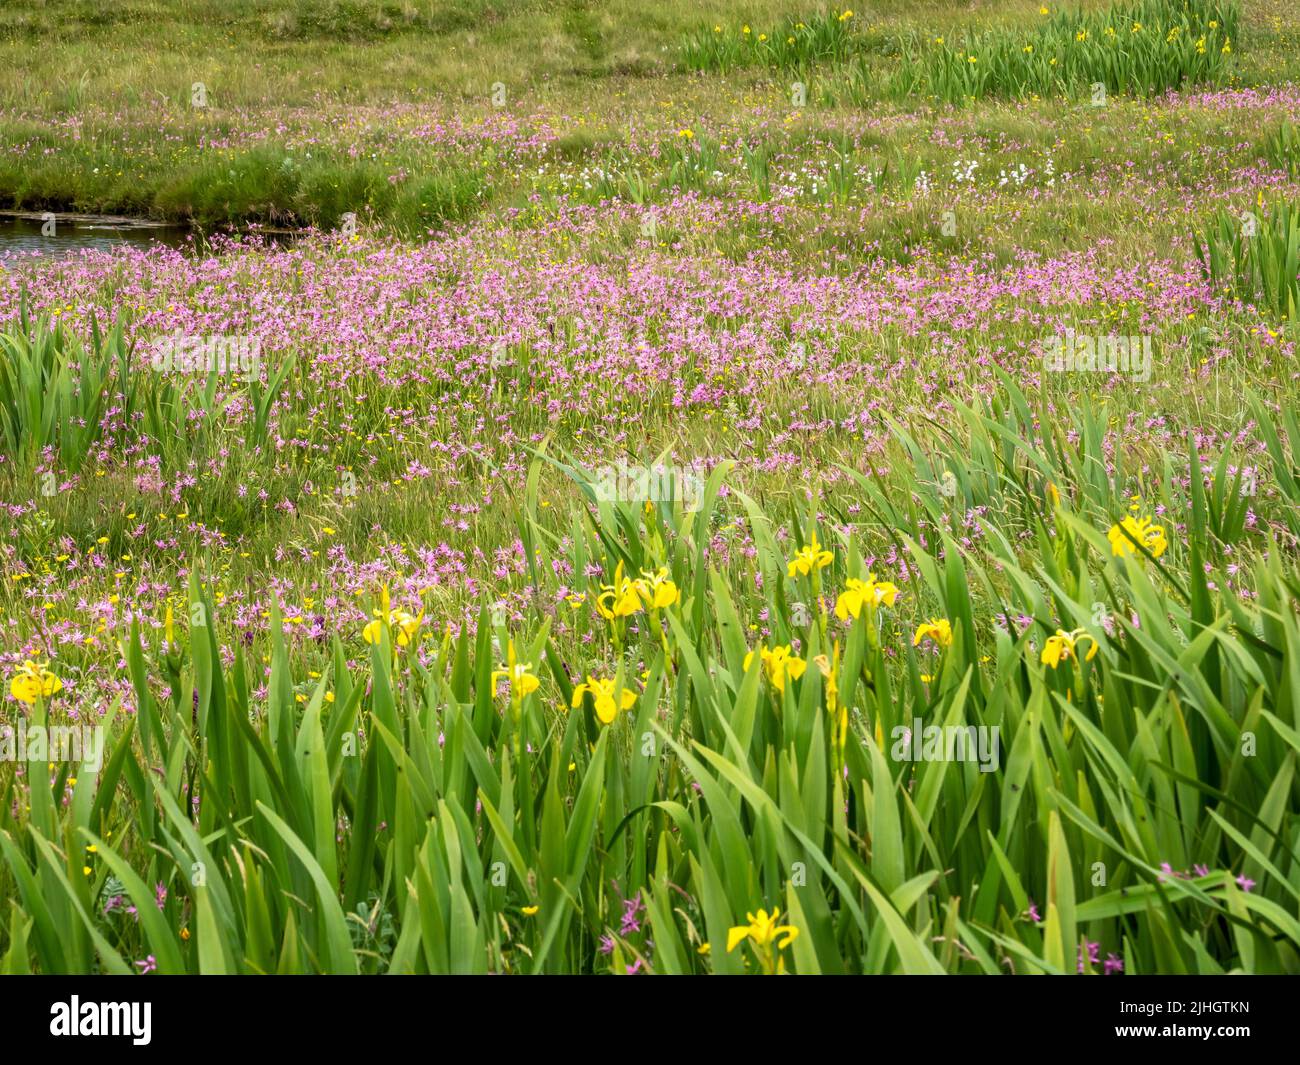 Ragged Robin, Orchids and Yellow Flag Iris growing in a damp meadow at Ling Ness, South Nesting, Shetland, Scotland, UK. Stock Photo